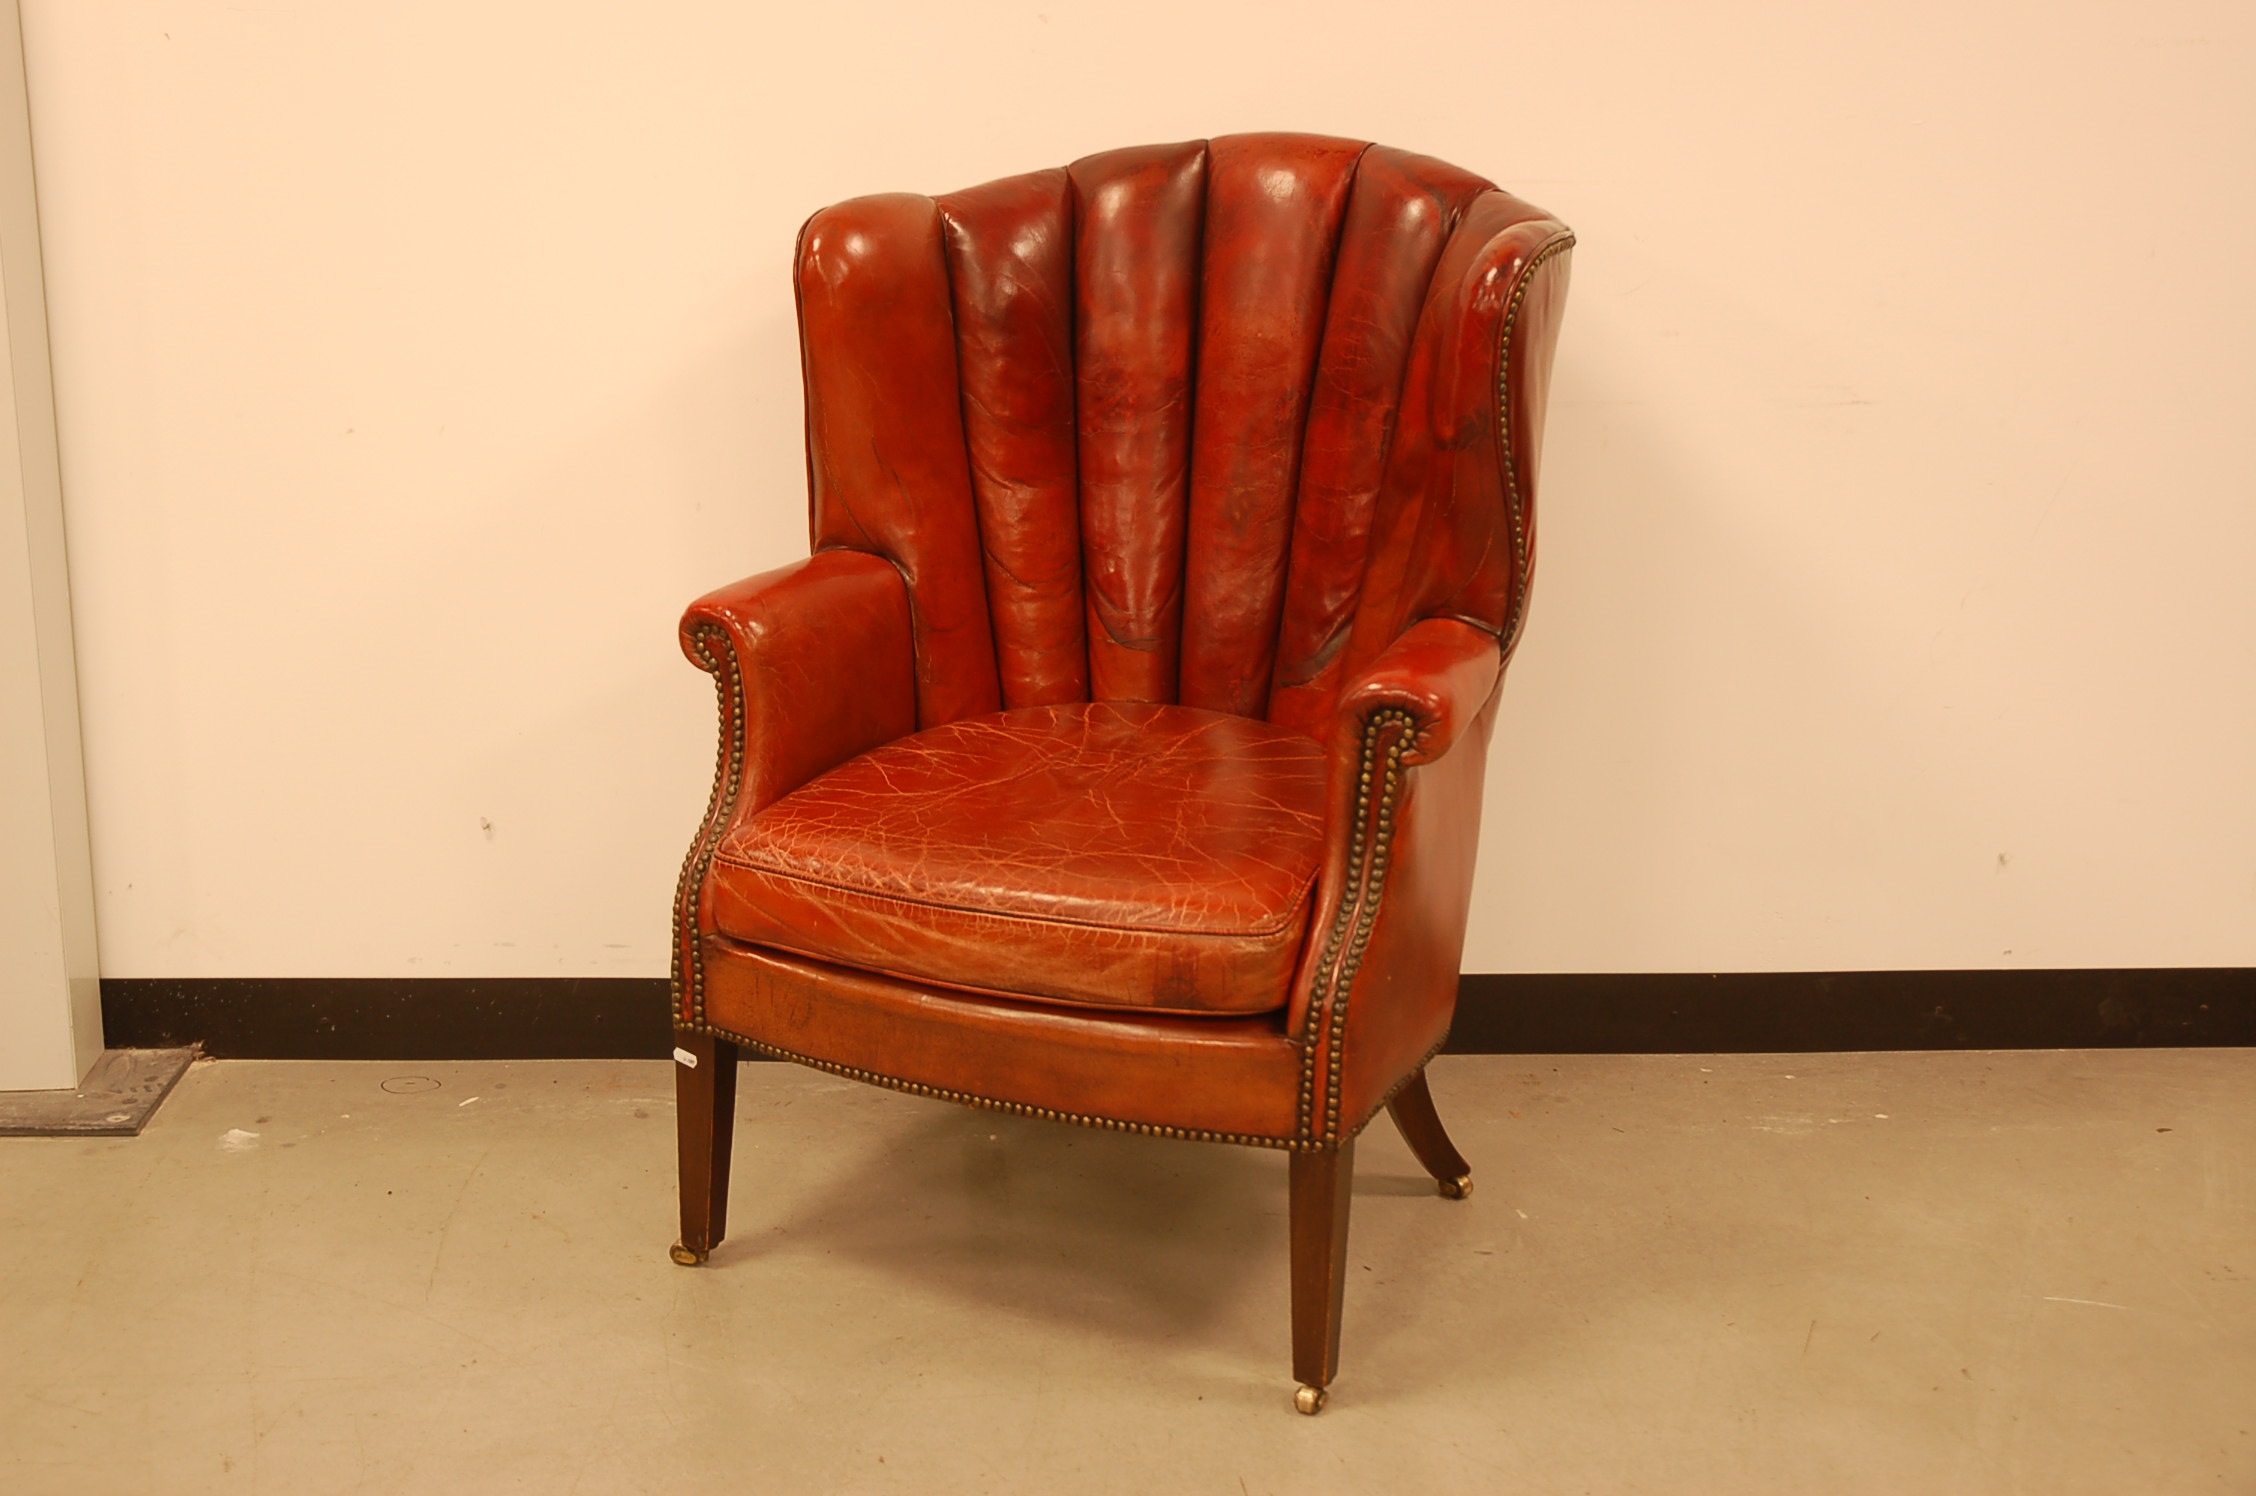 An early 20th century red leather armchair, on mahogany supports with brass casters